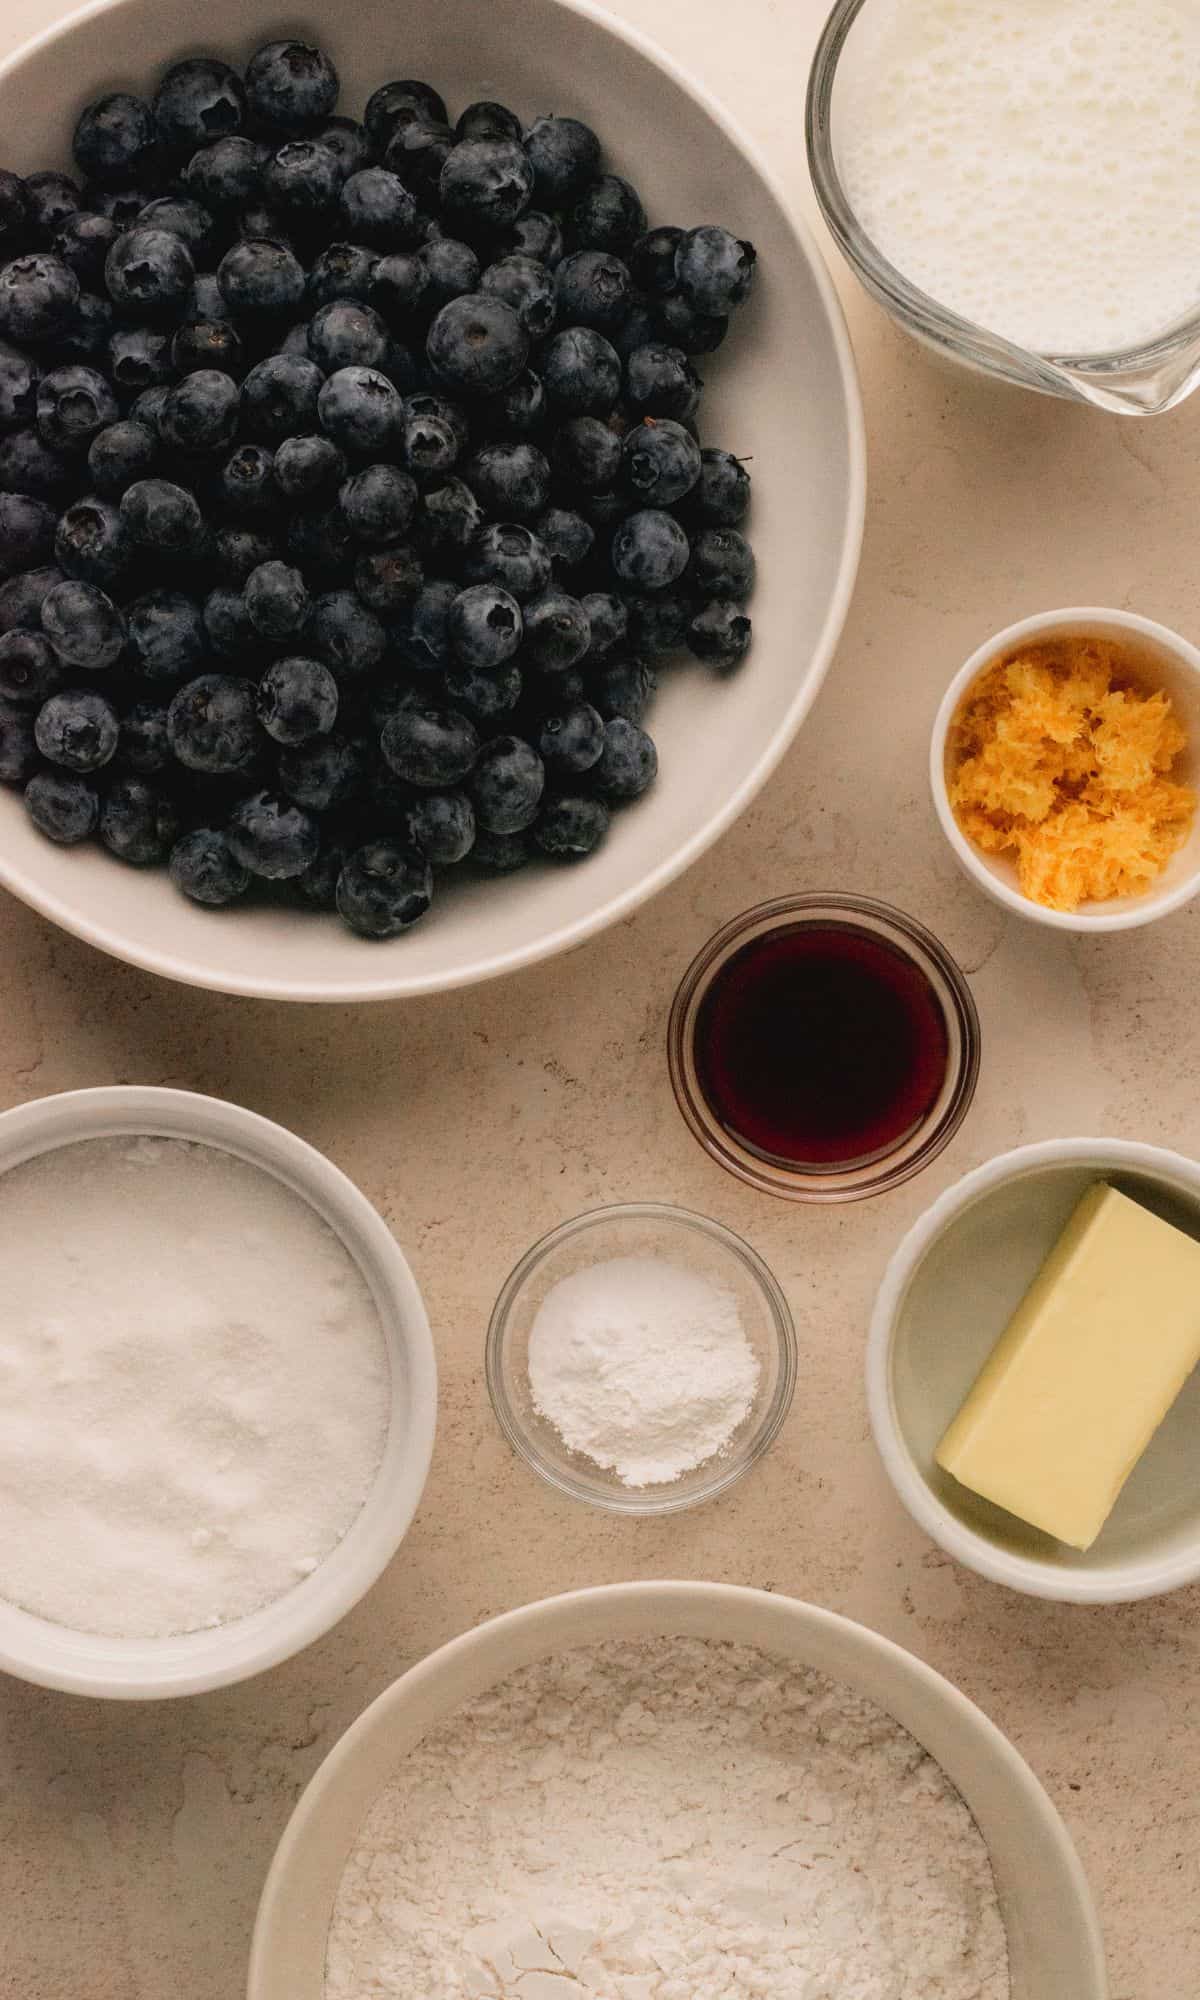 Buttermilk cake with blueberries ingredients.